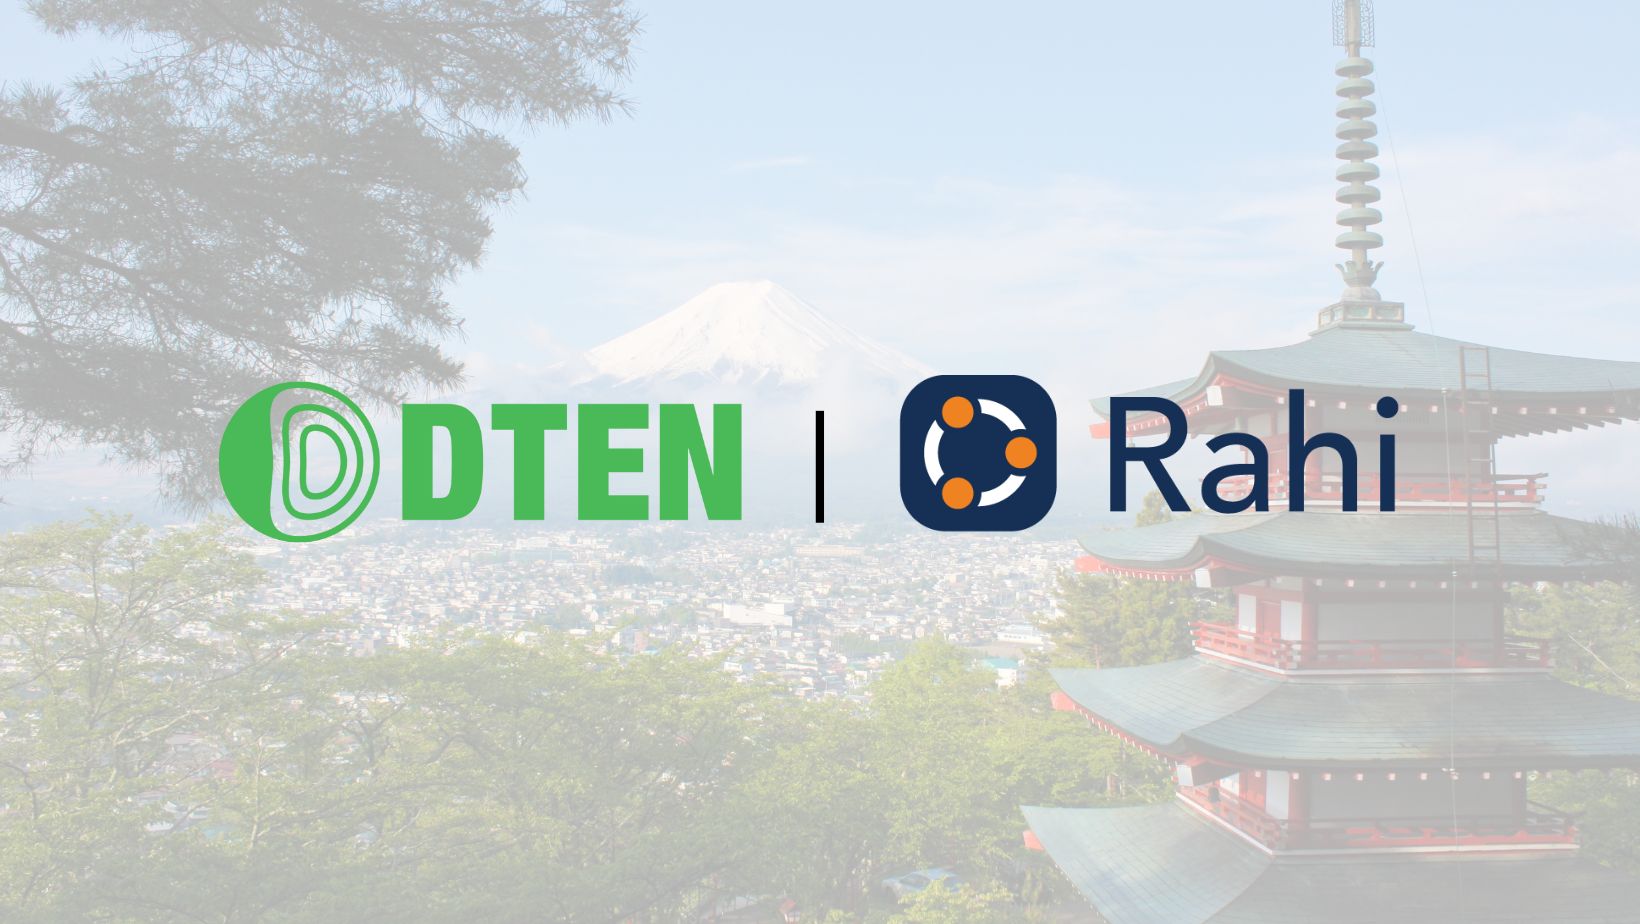 DTEN Signs New Distribution Agreement with Rahi Systems to Spearhead Growth in Japan